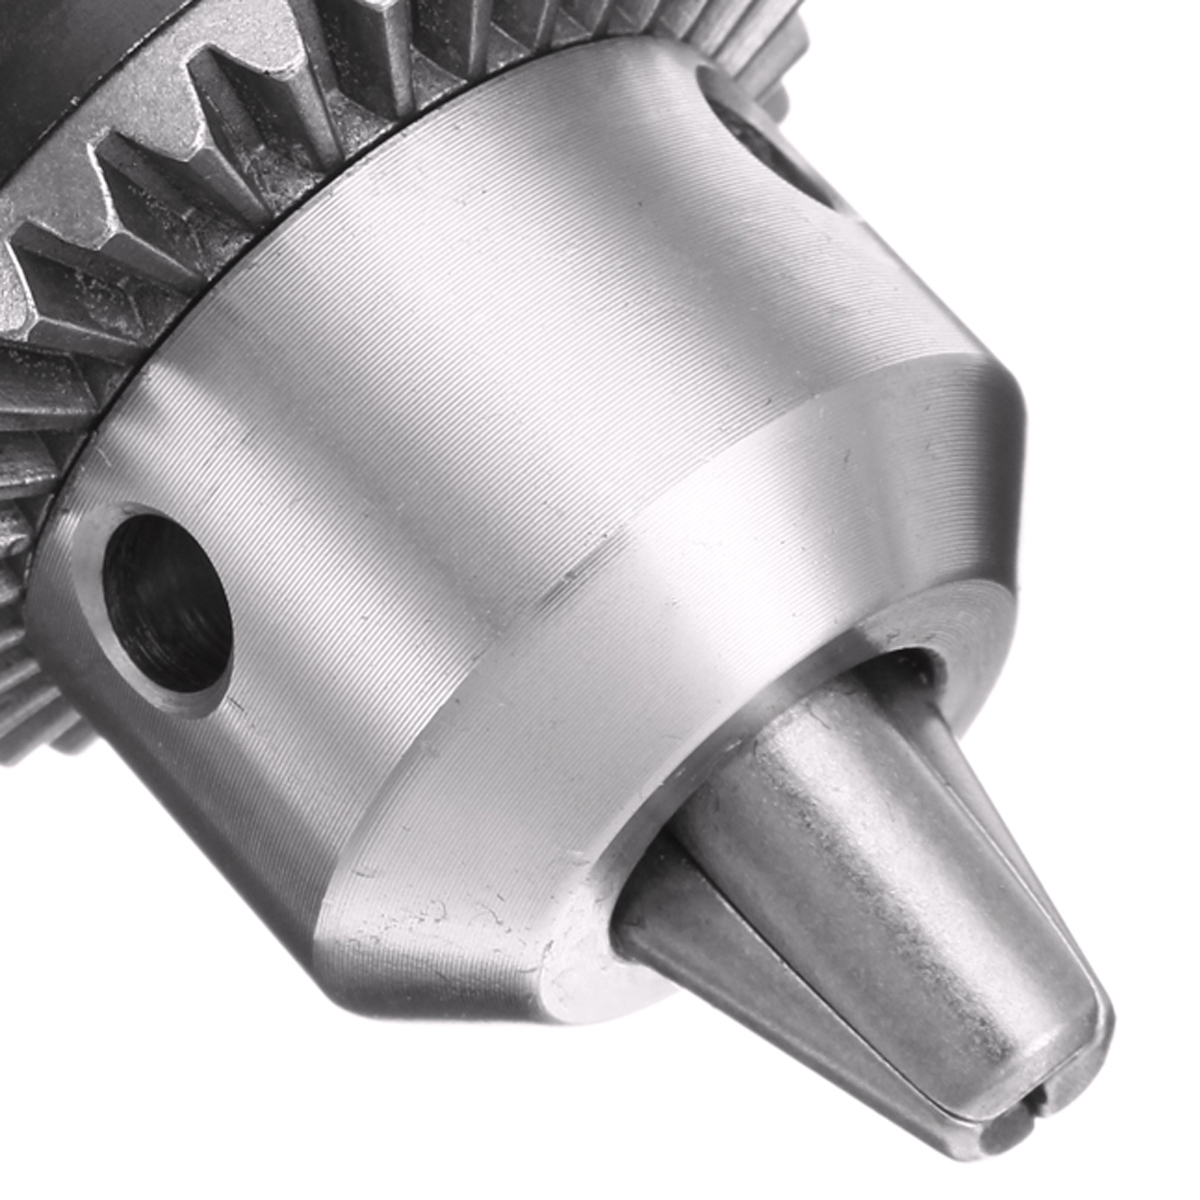 15-13mm-Metal-Stable-Keyed-Drill-Chuck-12-Inch-20-UNF-Thread-With-Connecting-Rod-1303419-6